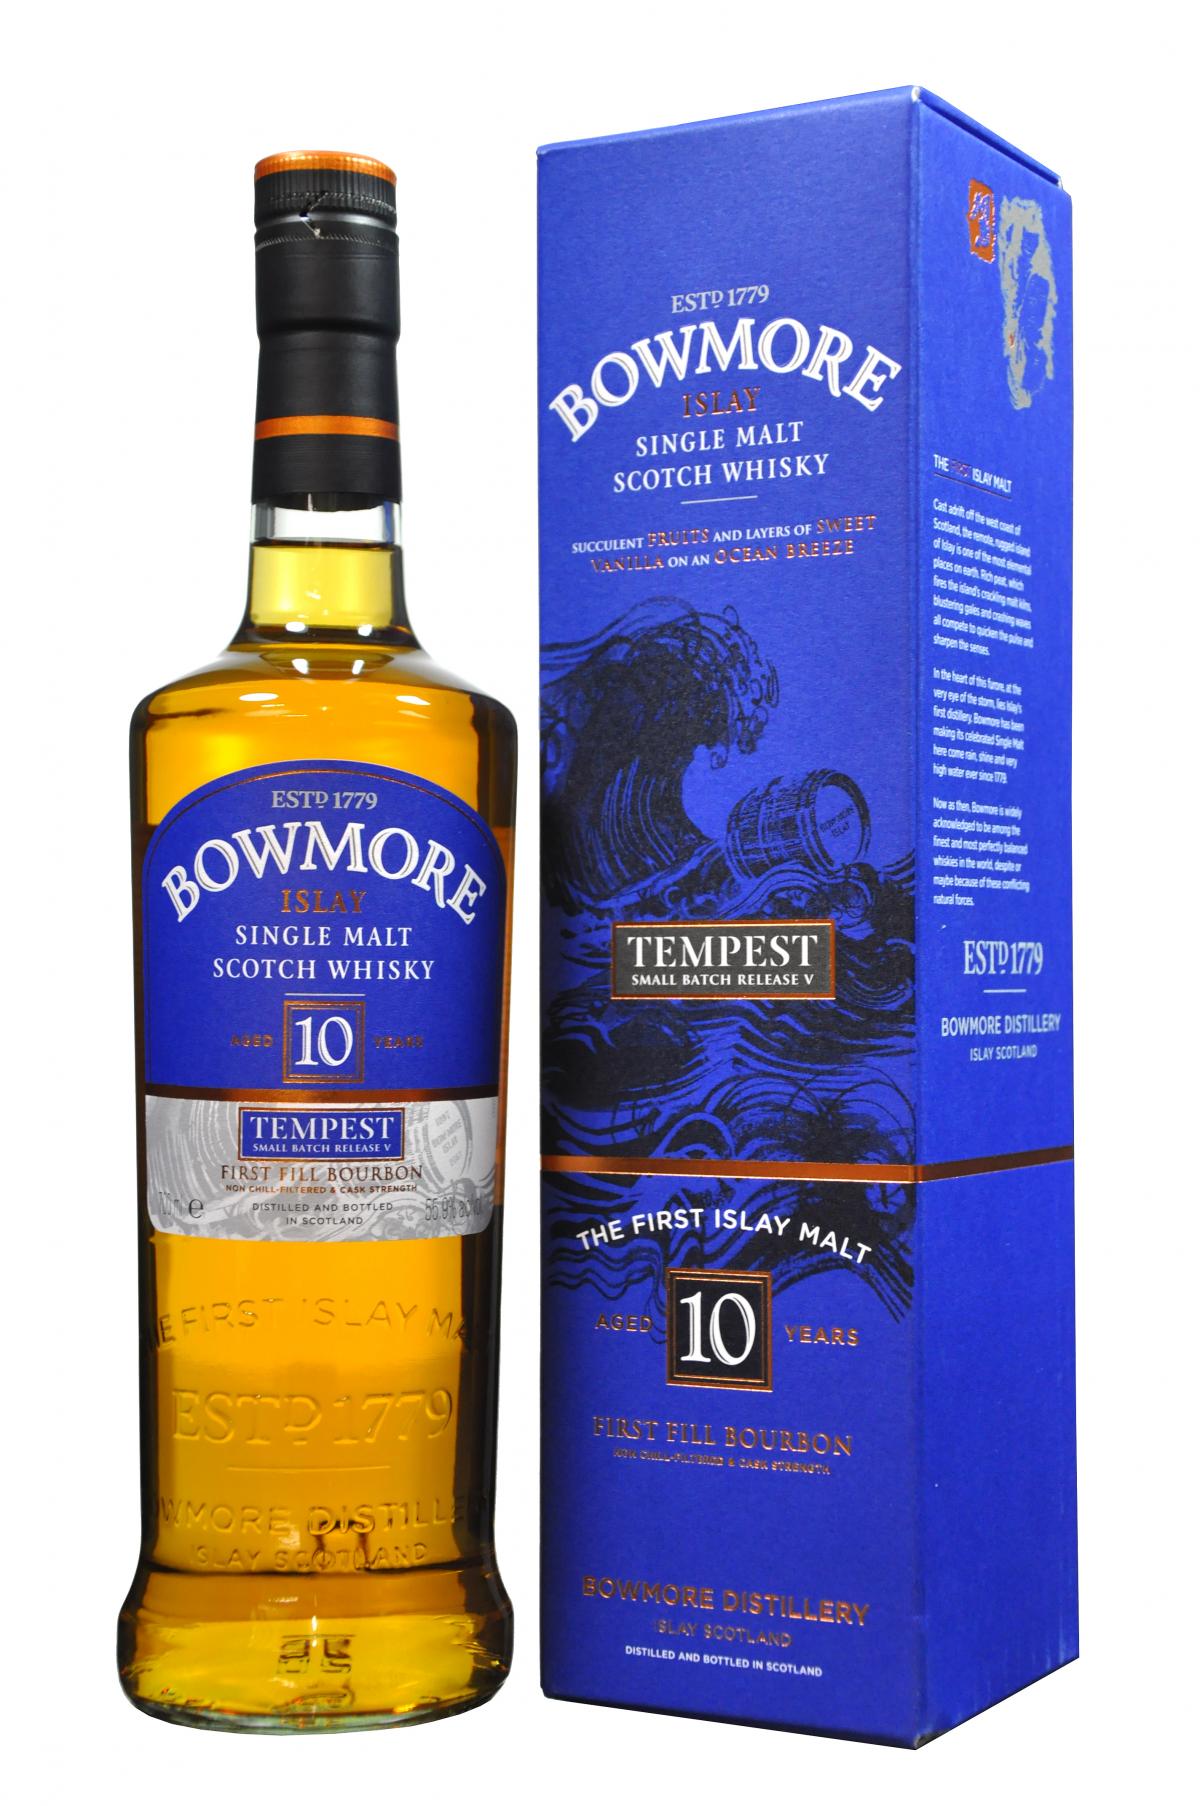 bowmore 10 year old, tempest batch 5, small batch release, islay single malt scoth whisky